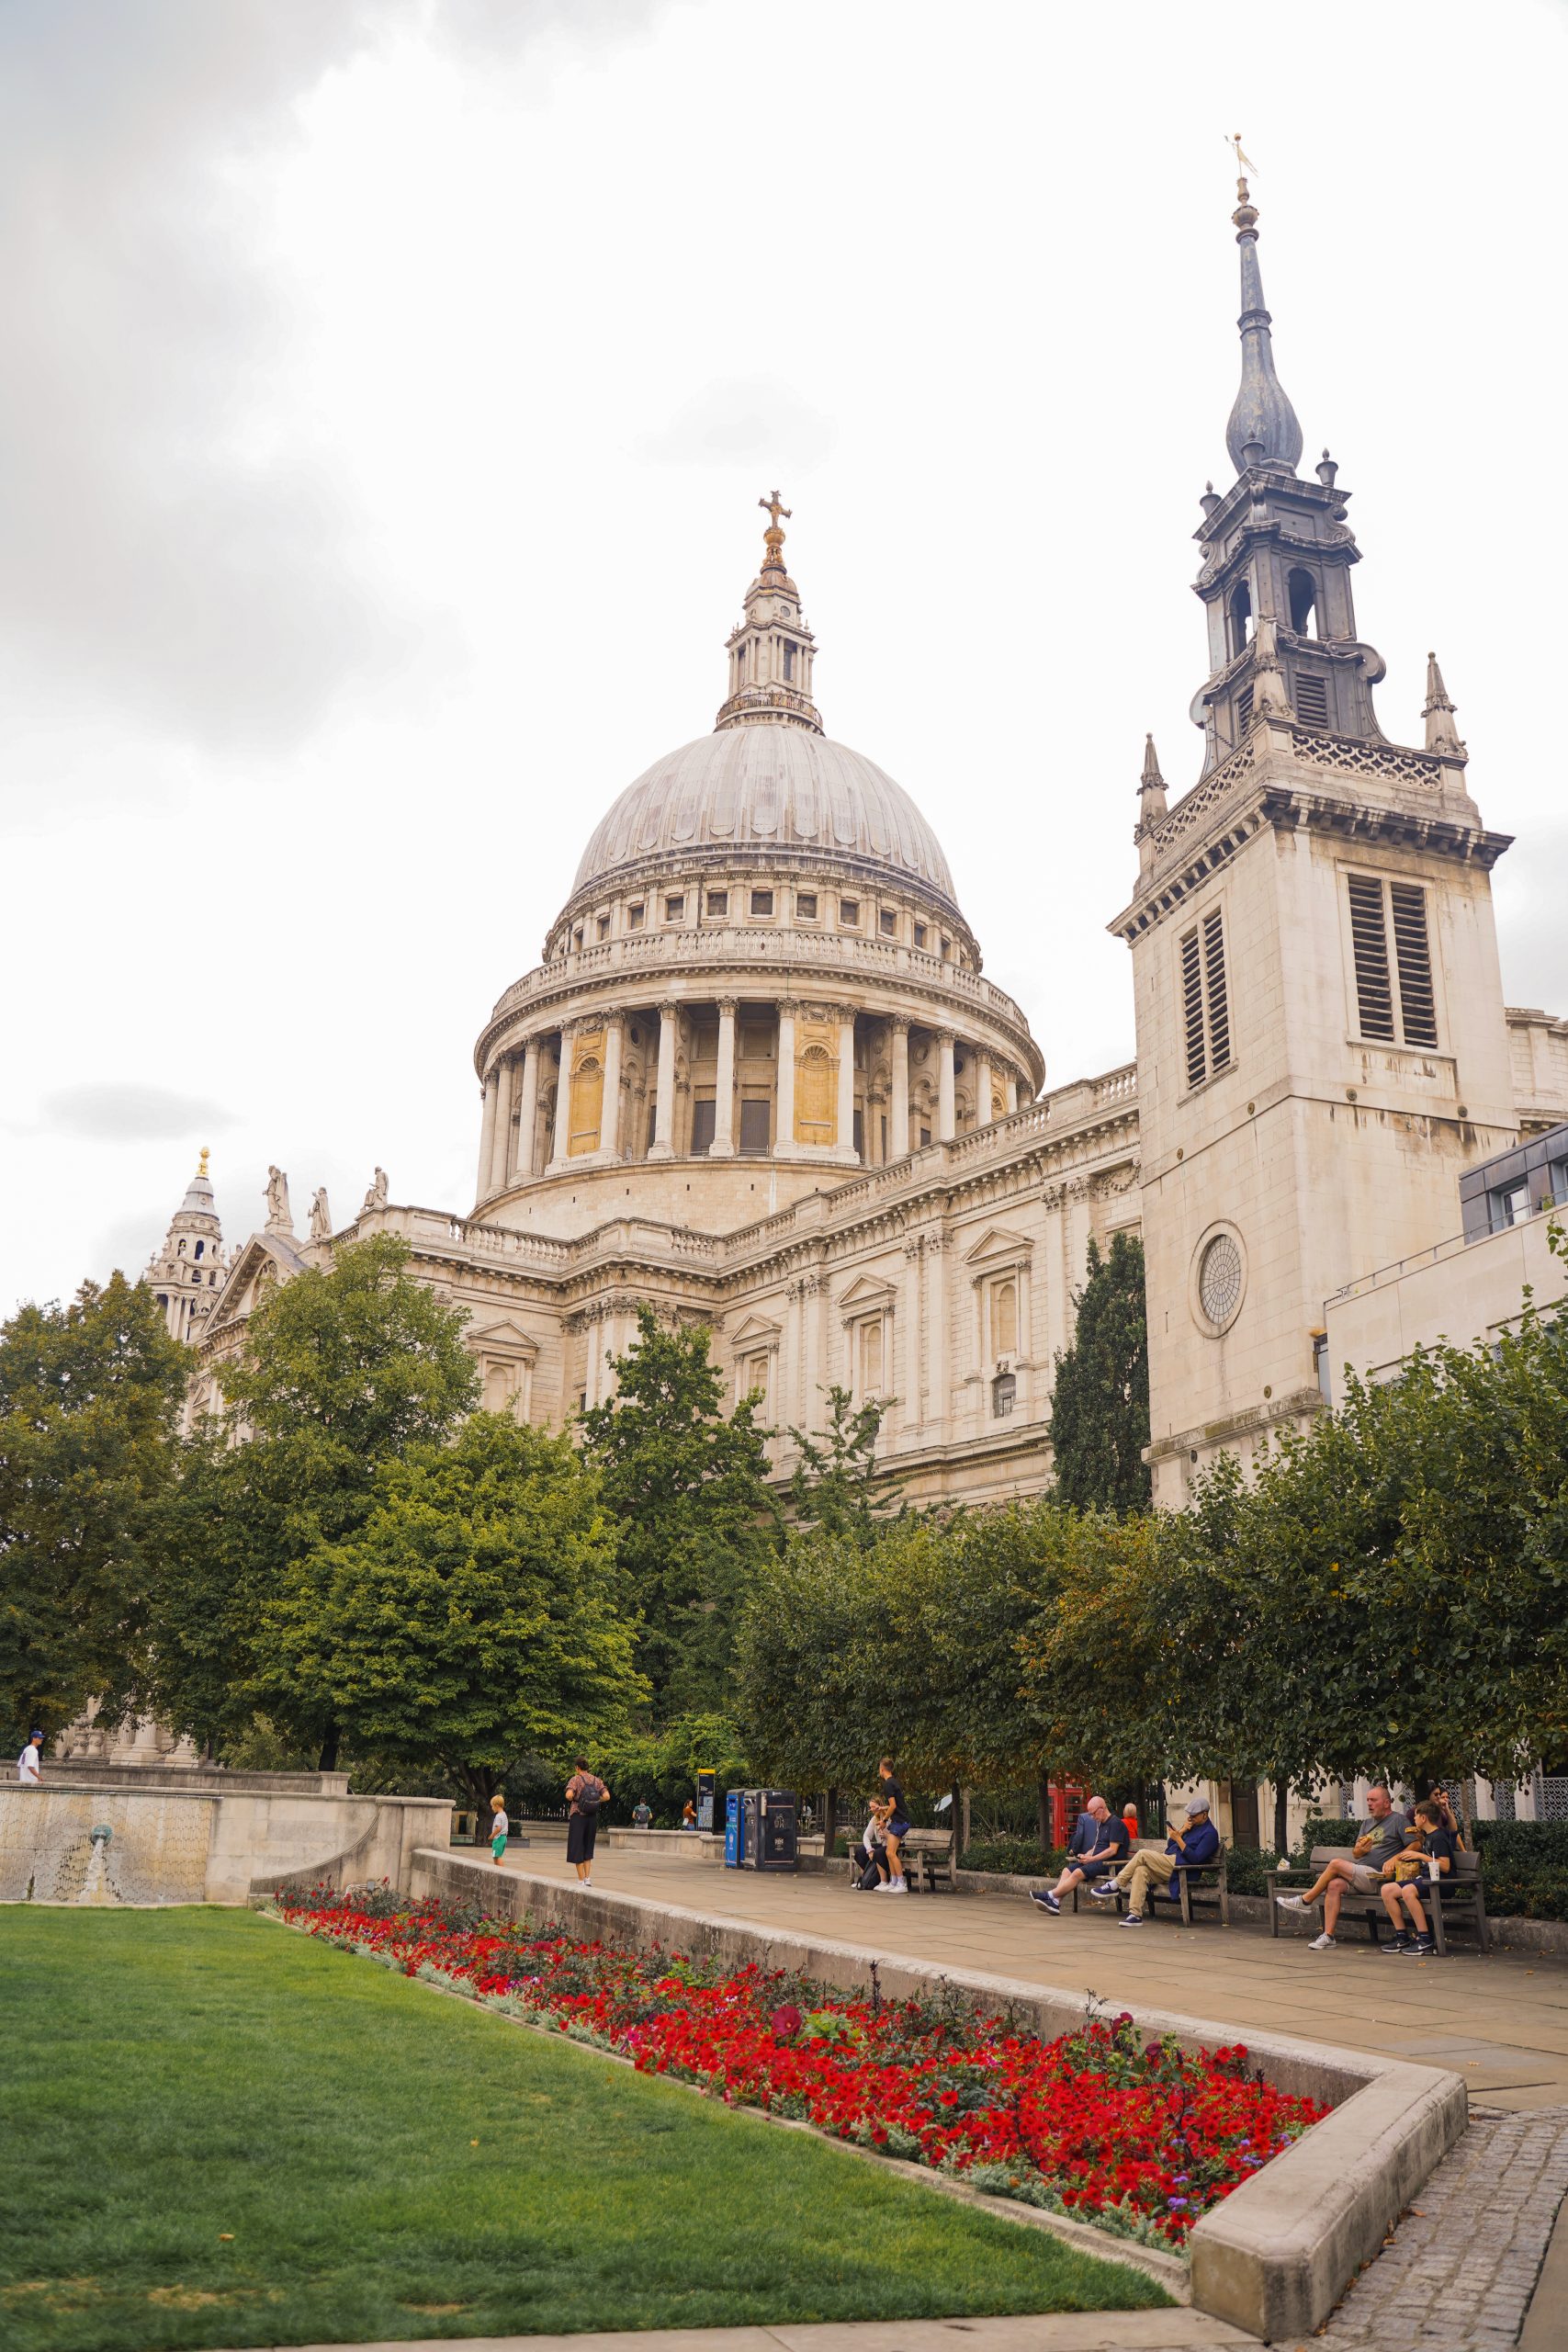 3. St. Pauls cathedral